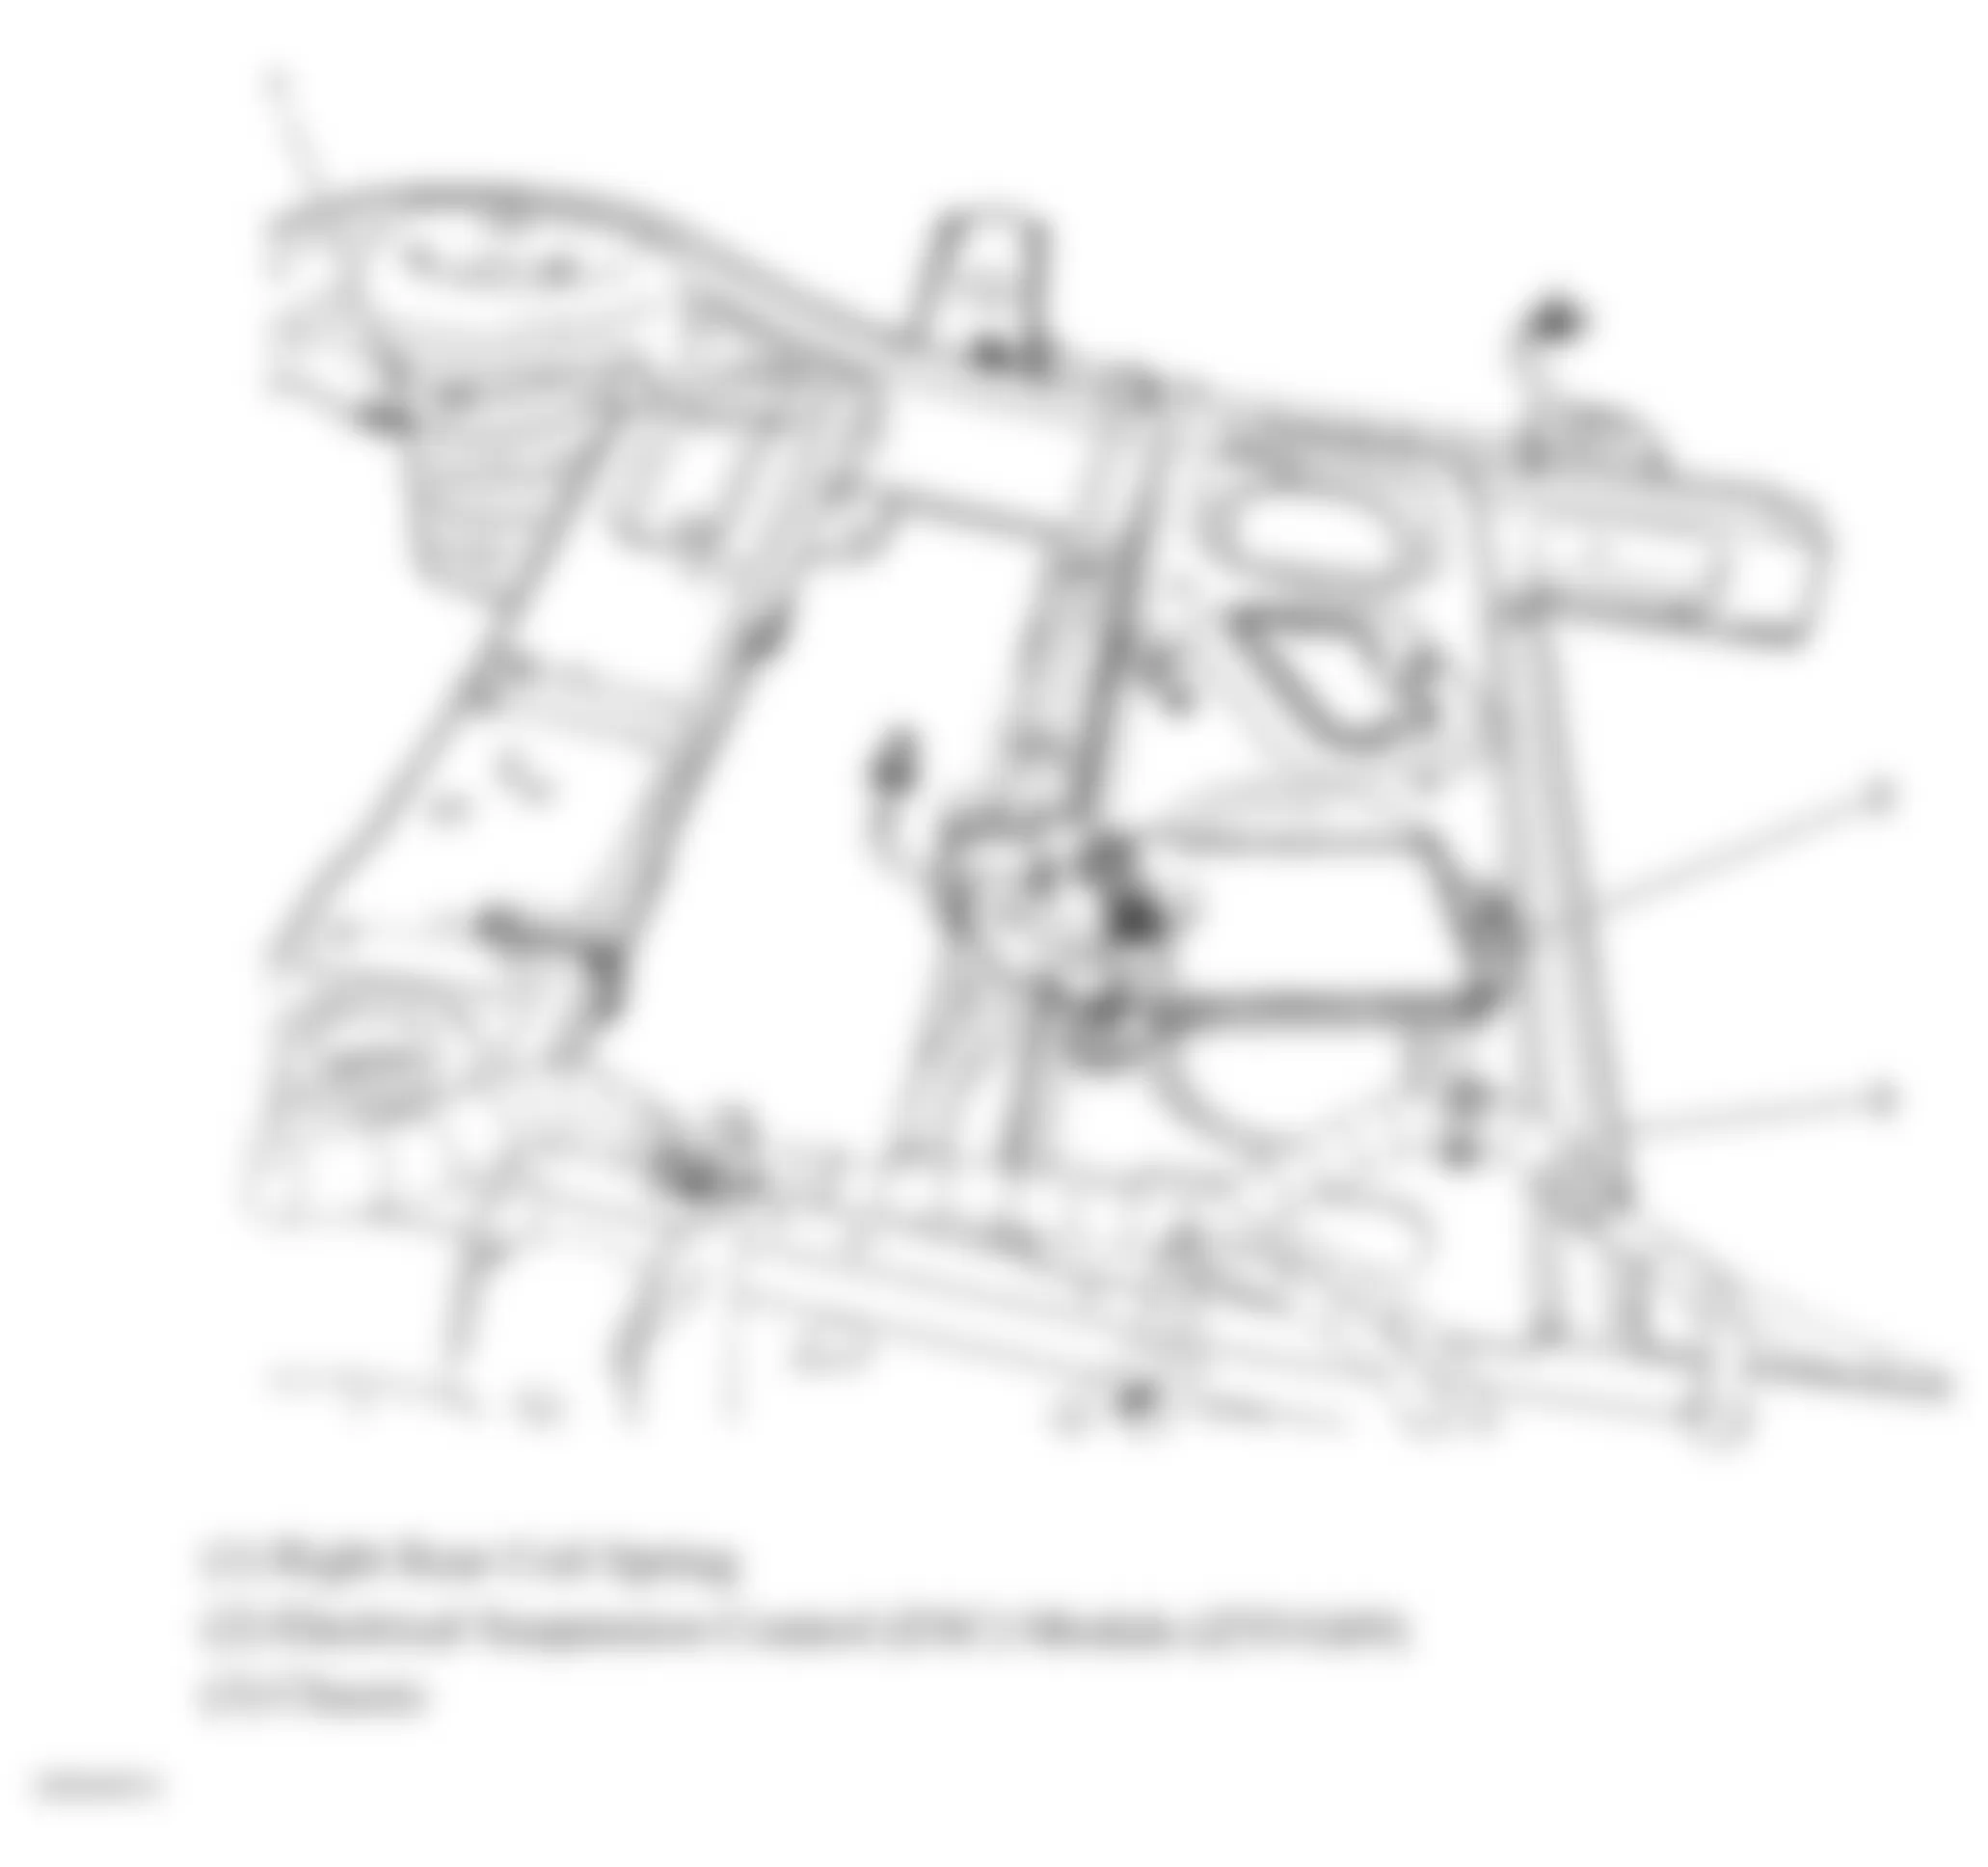 Chevrolet Suburban K1500 2009 - Component Locations -  Rear Chassis